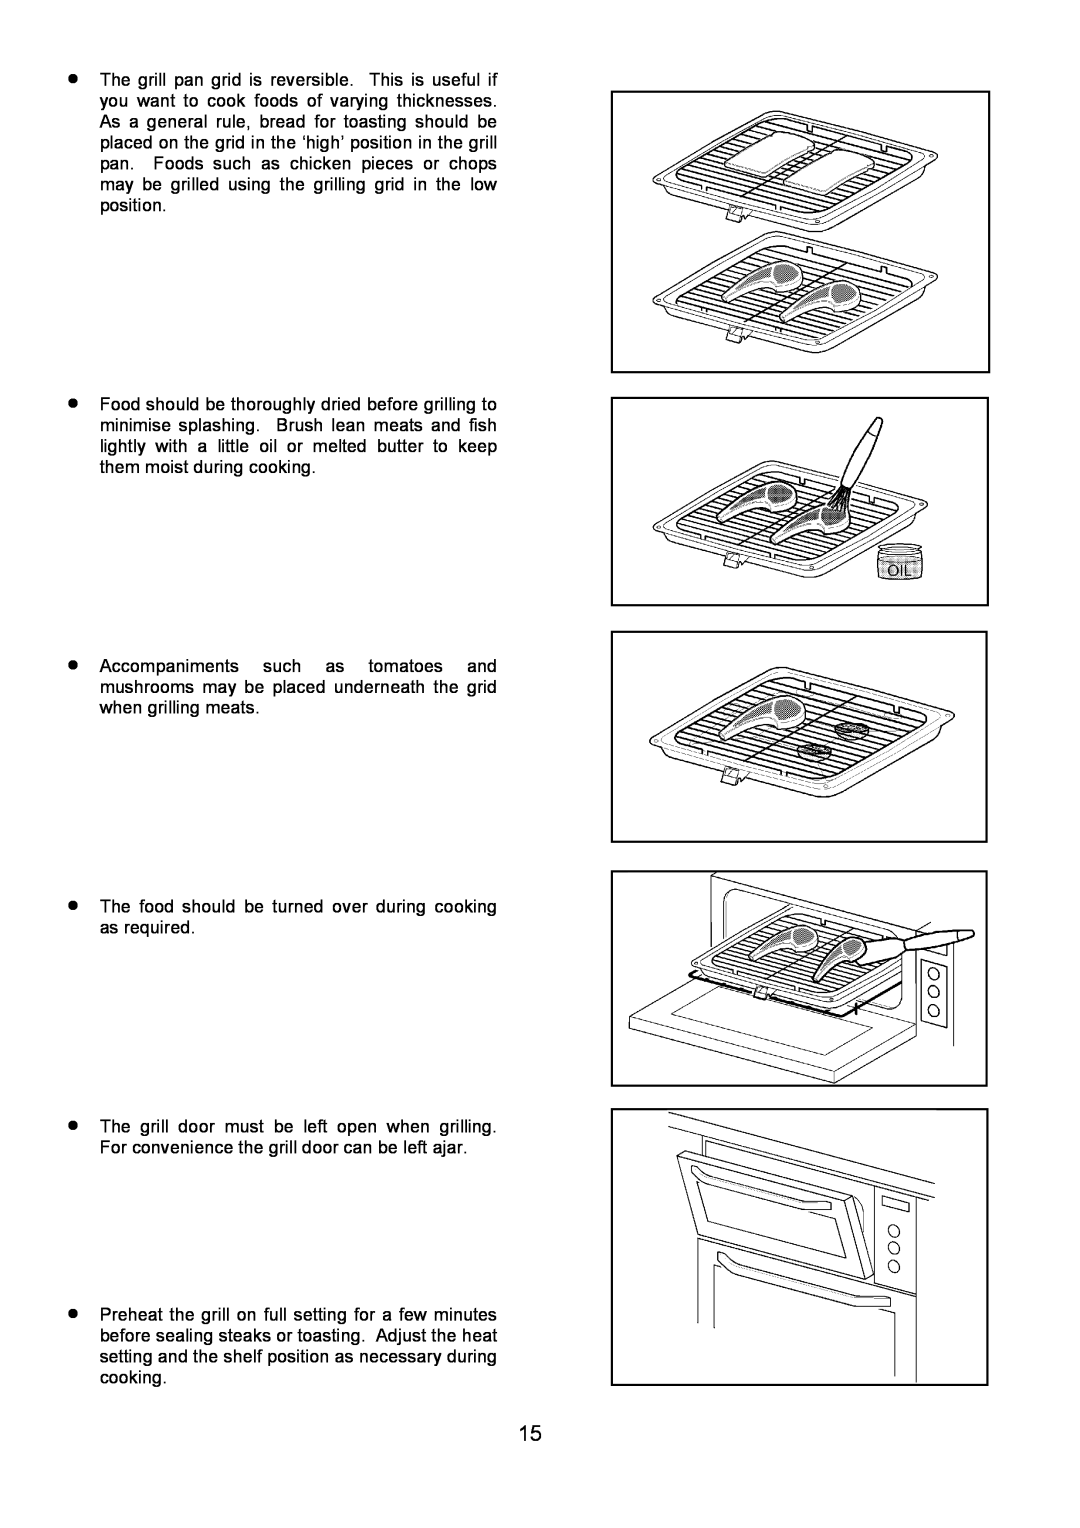 AEG 3210 BU installation instructions The food should be turned over during cooking as required 